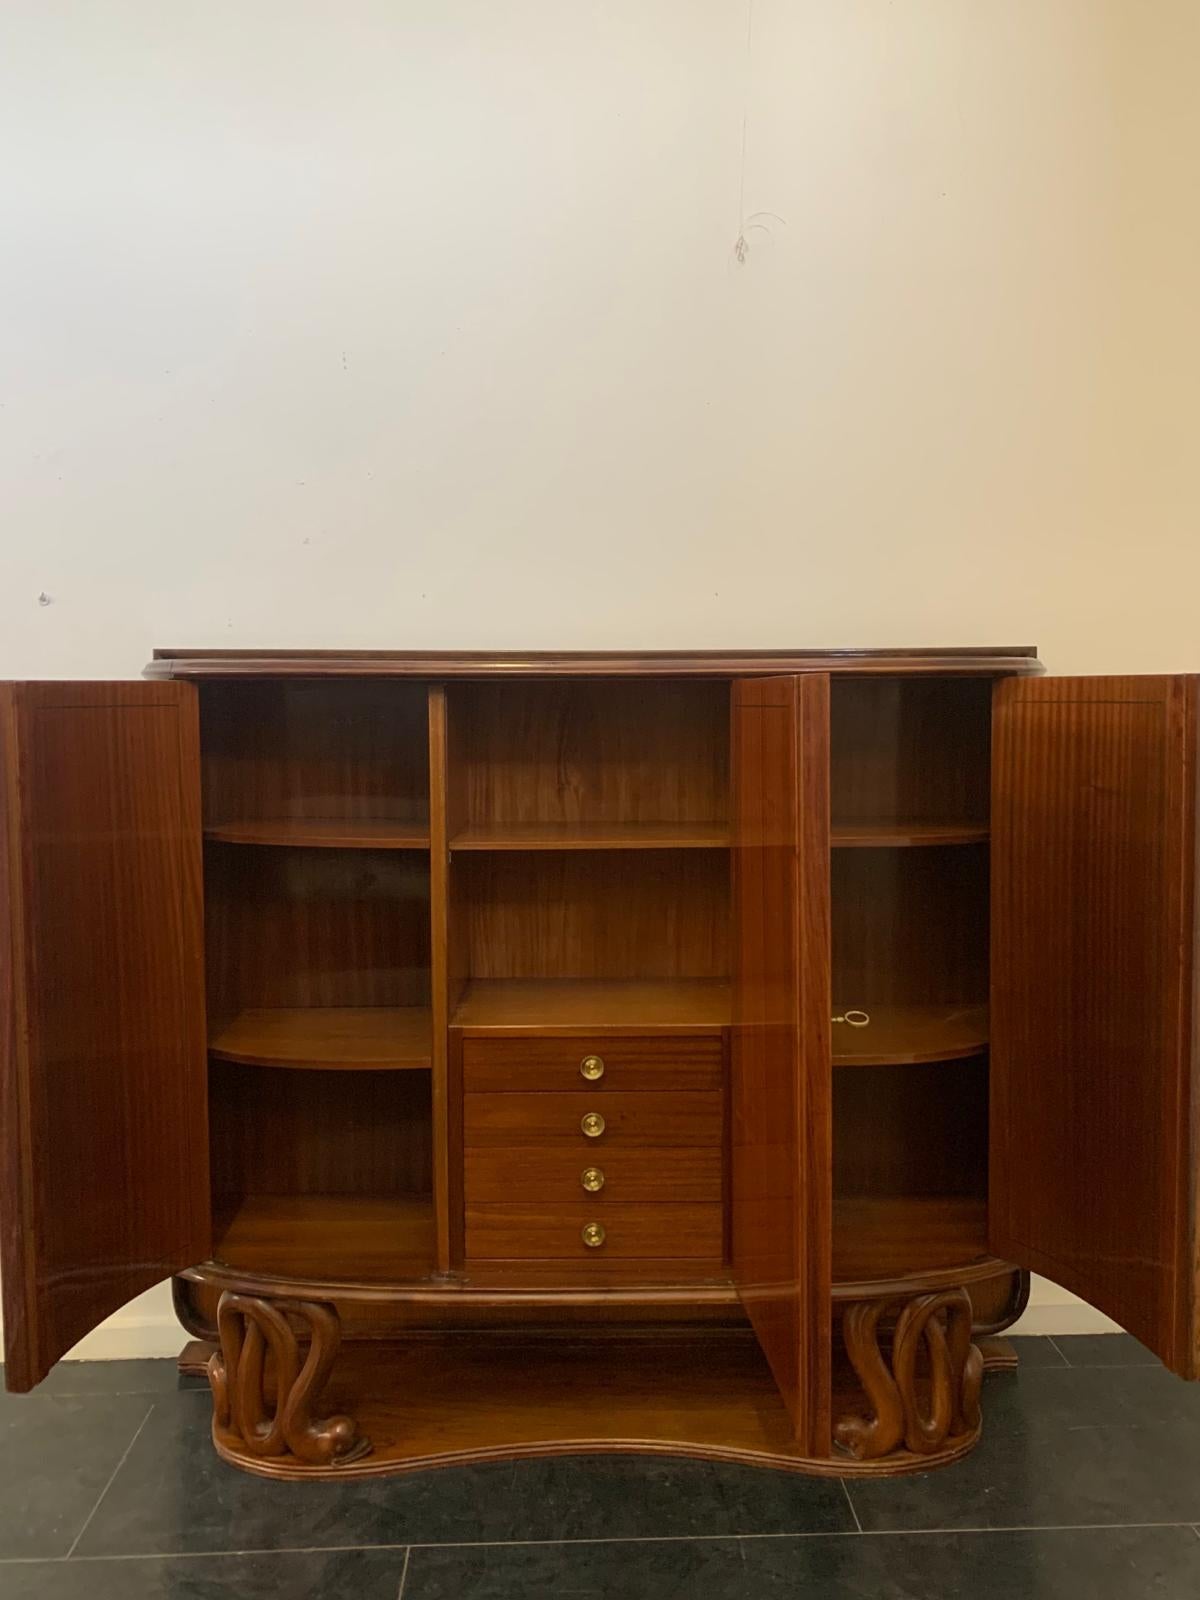 Mahogany sideboard veneered in cherry wood by Fratelli Tagliabue, 1940s For Sale 1